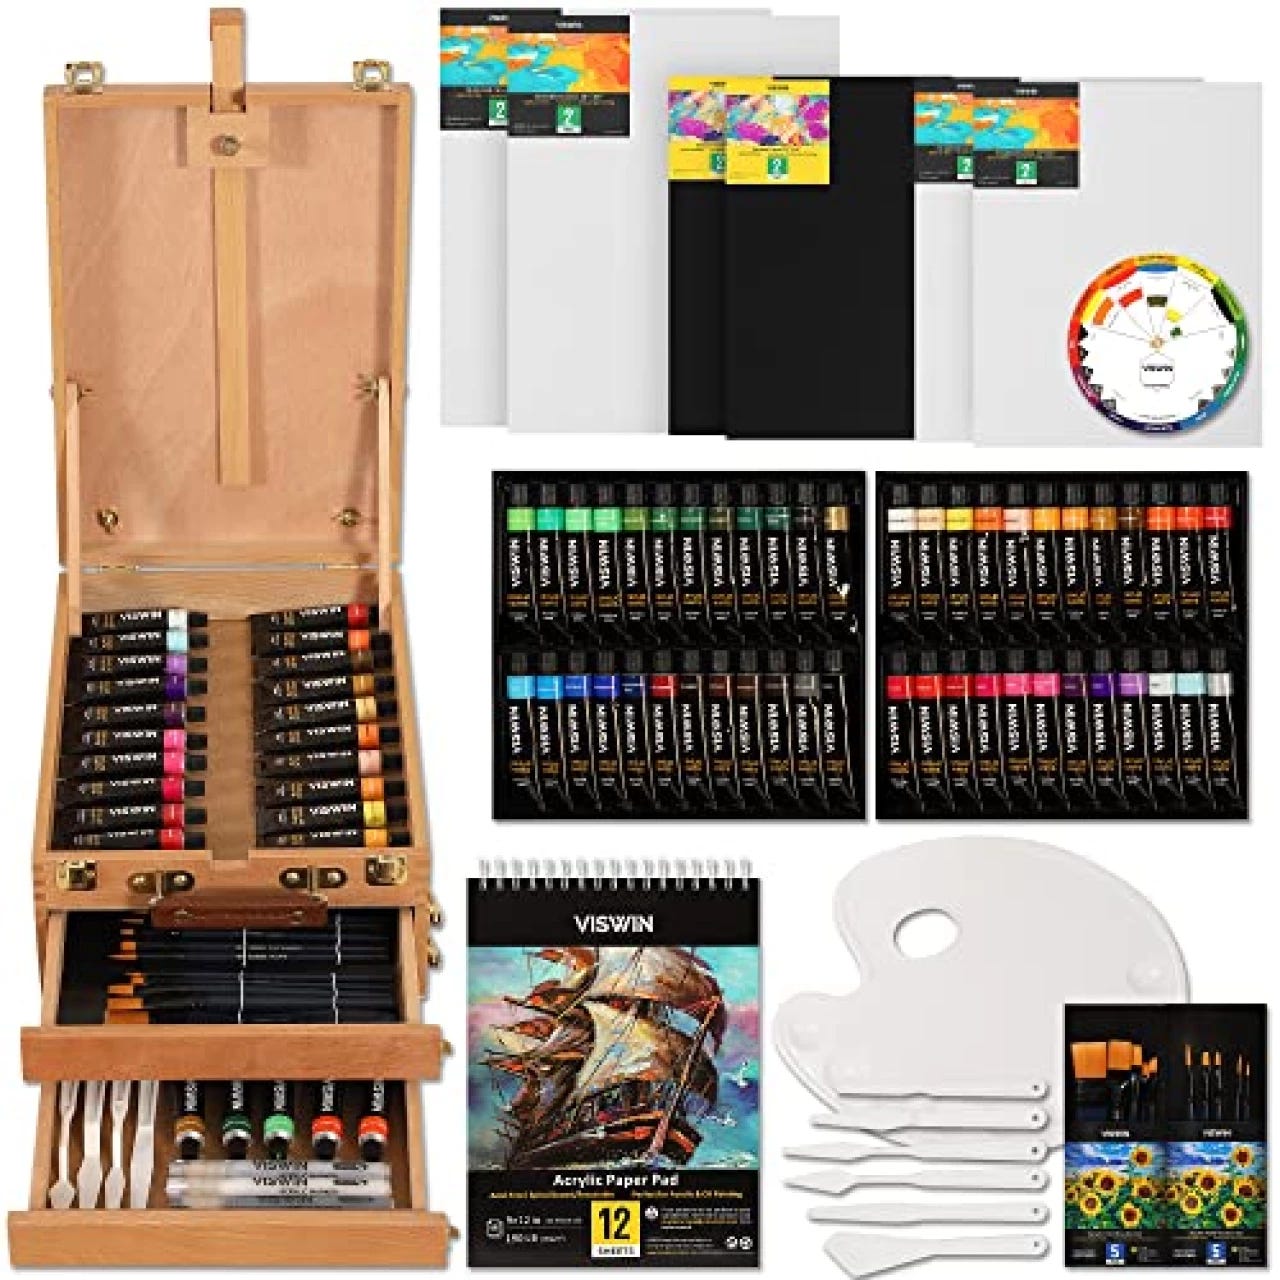 Painting Supplies - Model Paints - Tabletop Supplies